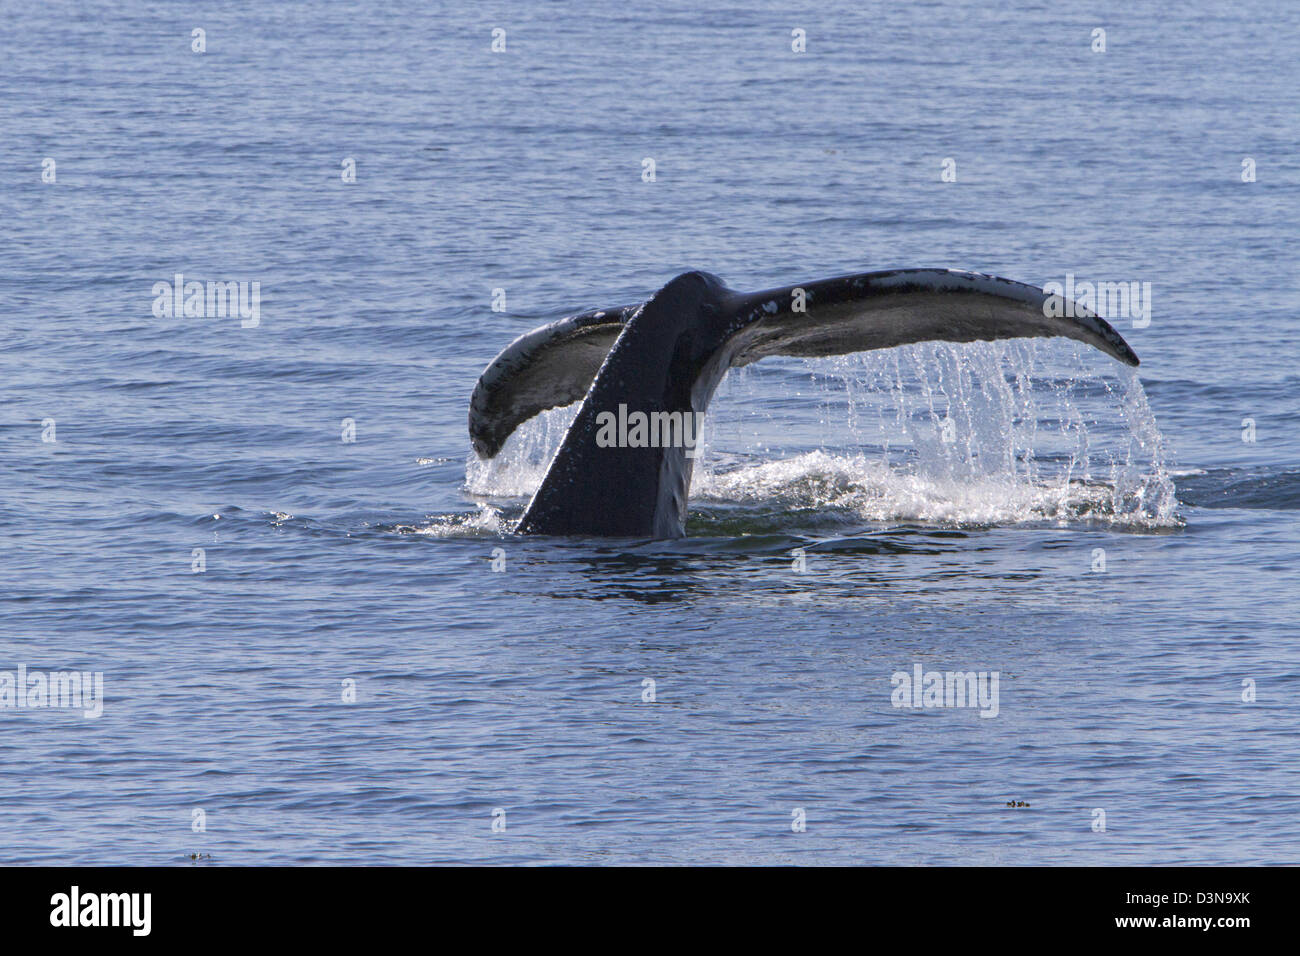 Fluked tail of a Humpback Whale (Megaptera novaeangliae) in the Johnstone Strait near Telegraph Cove, BC, Canada in August Stock Photo